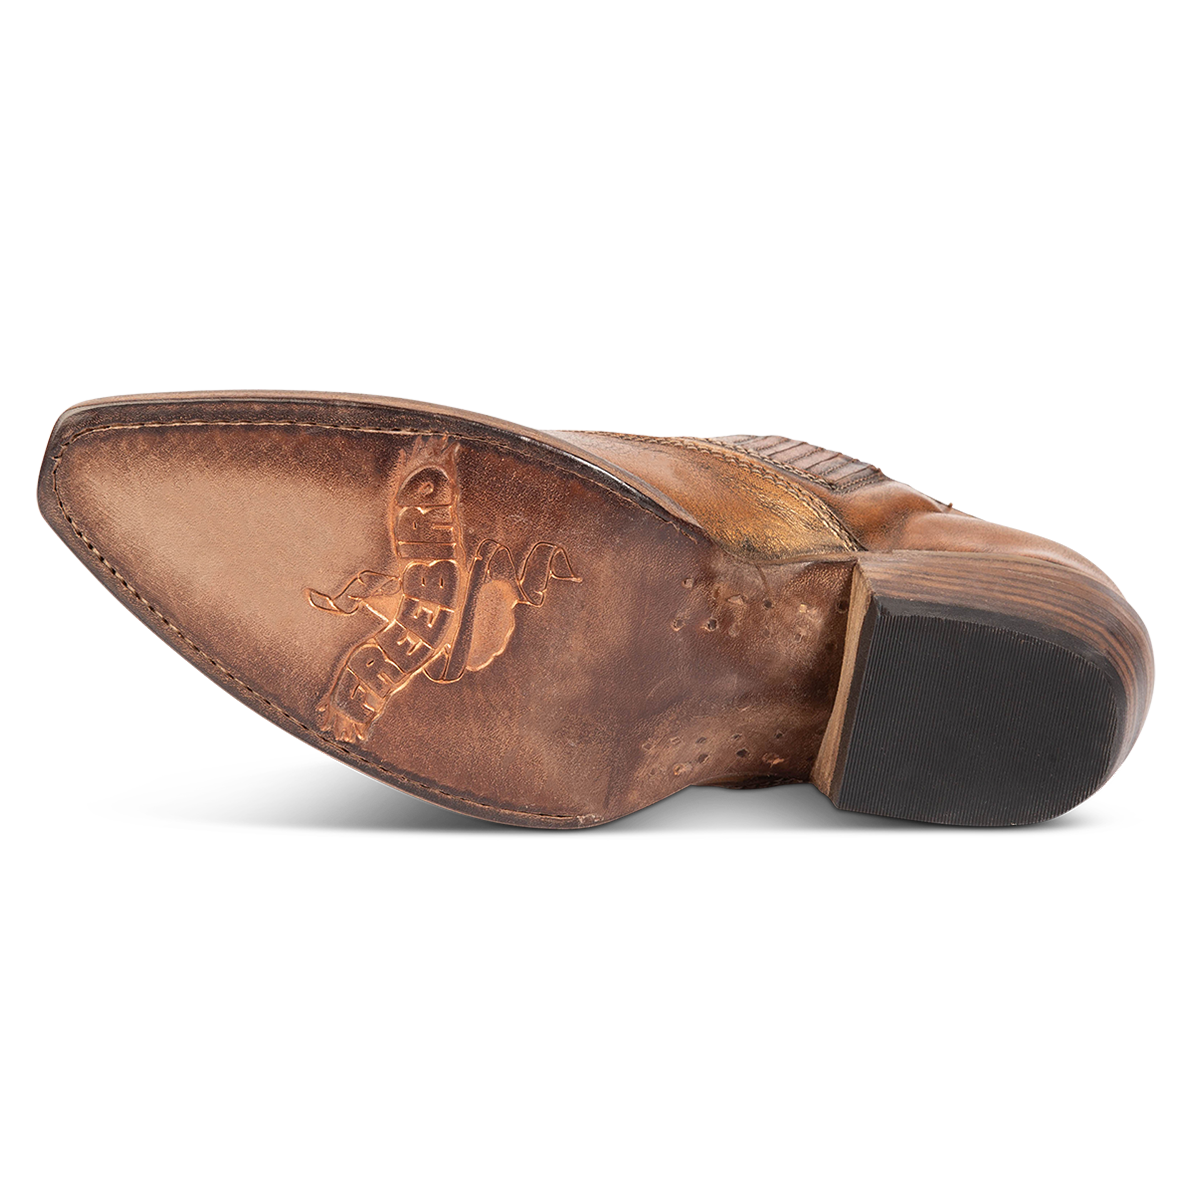 Leather sole imprinted with FREEBIRD on women's Wyoming bronze western shoe